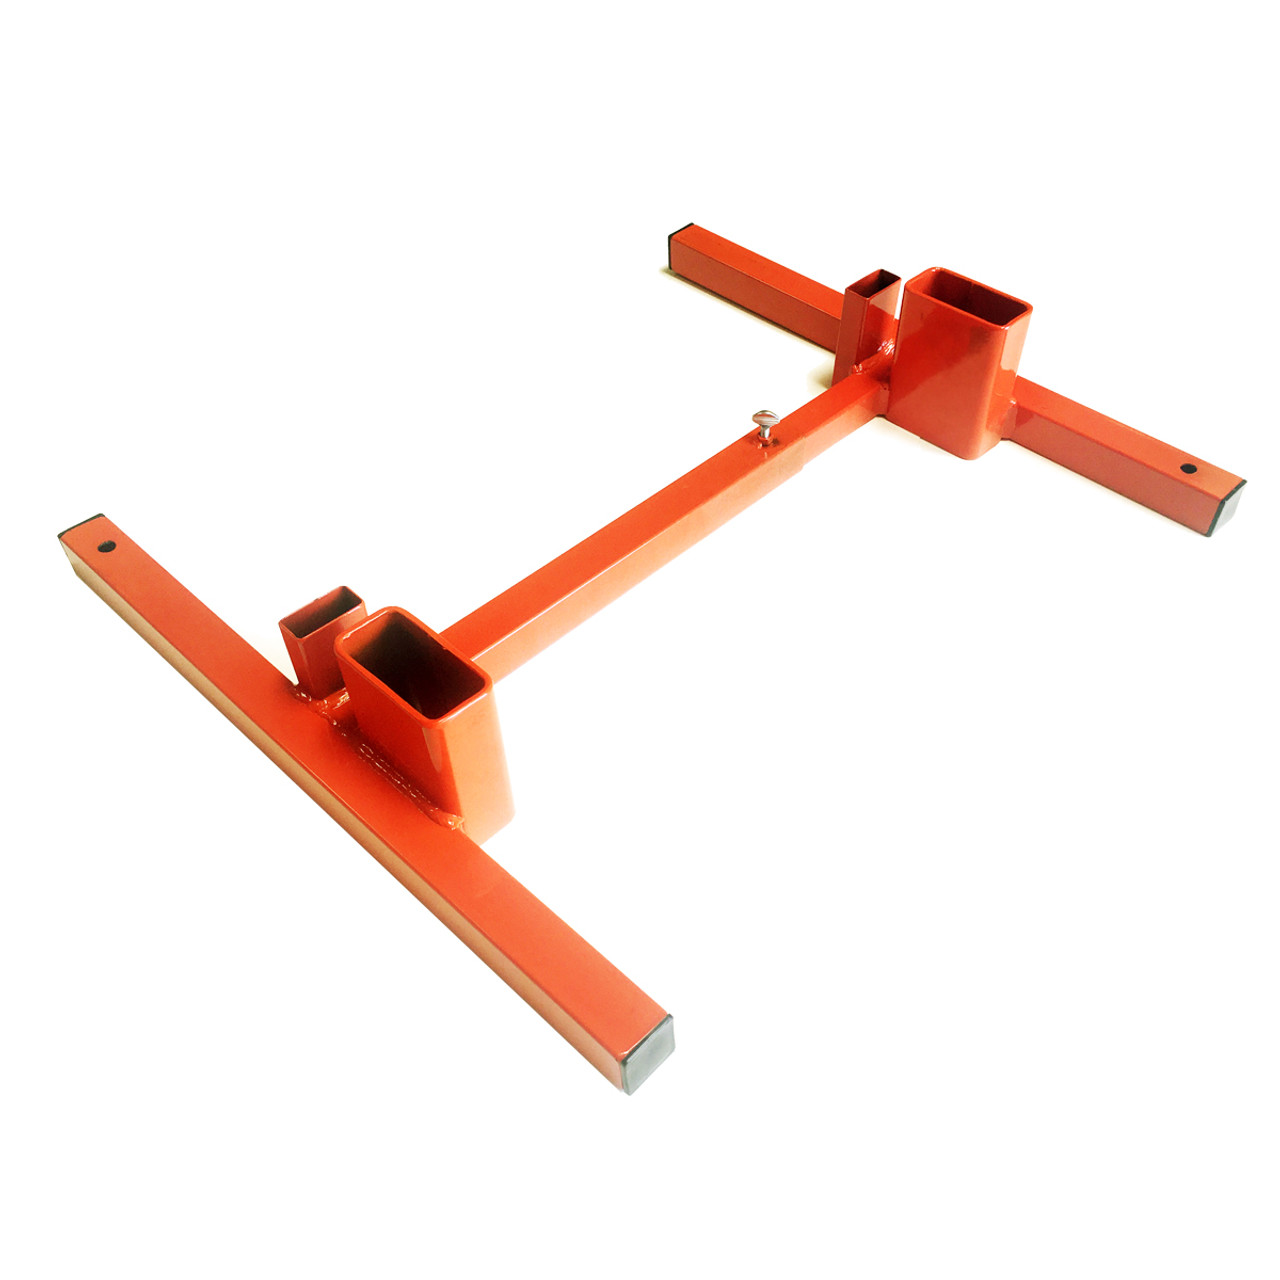 Shooting Target Stand Base 2 in 1 Adjustable